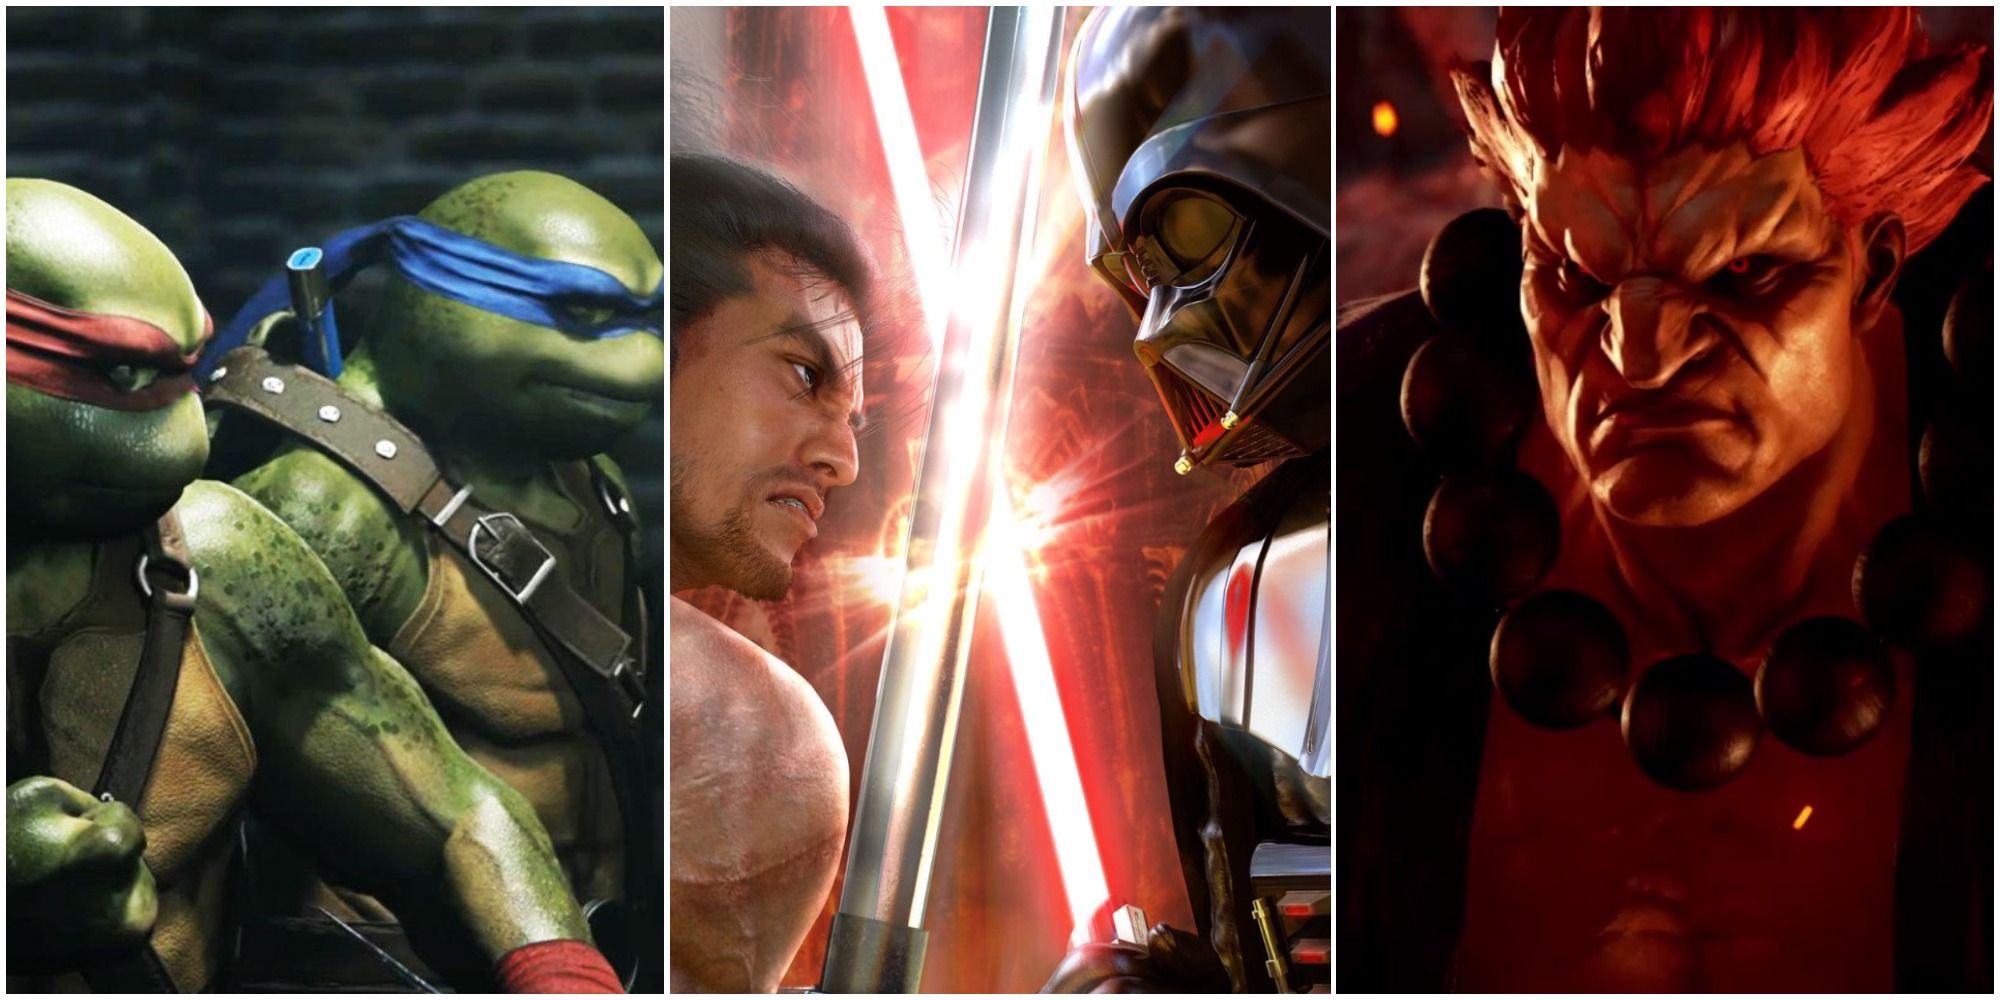 TMNT from Injustice 2, Mitsurugi and Darth Vader from Soul Calibur 4, and Akuma from Tekken 7, left to right